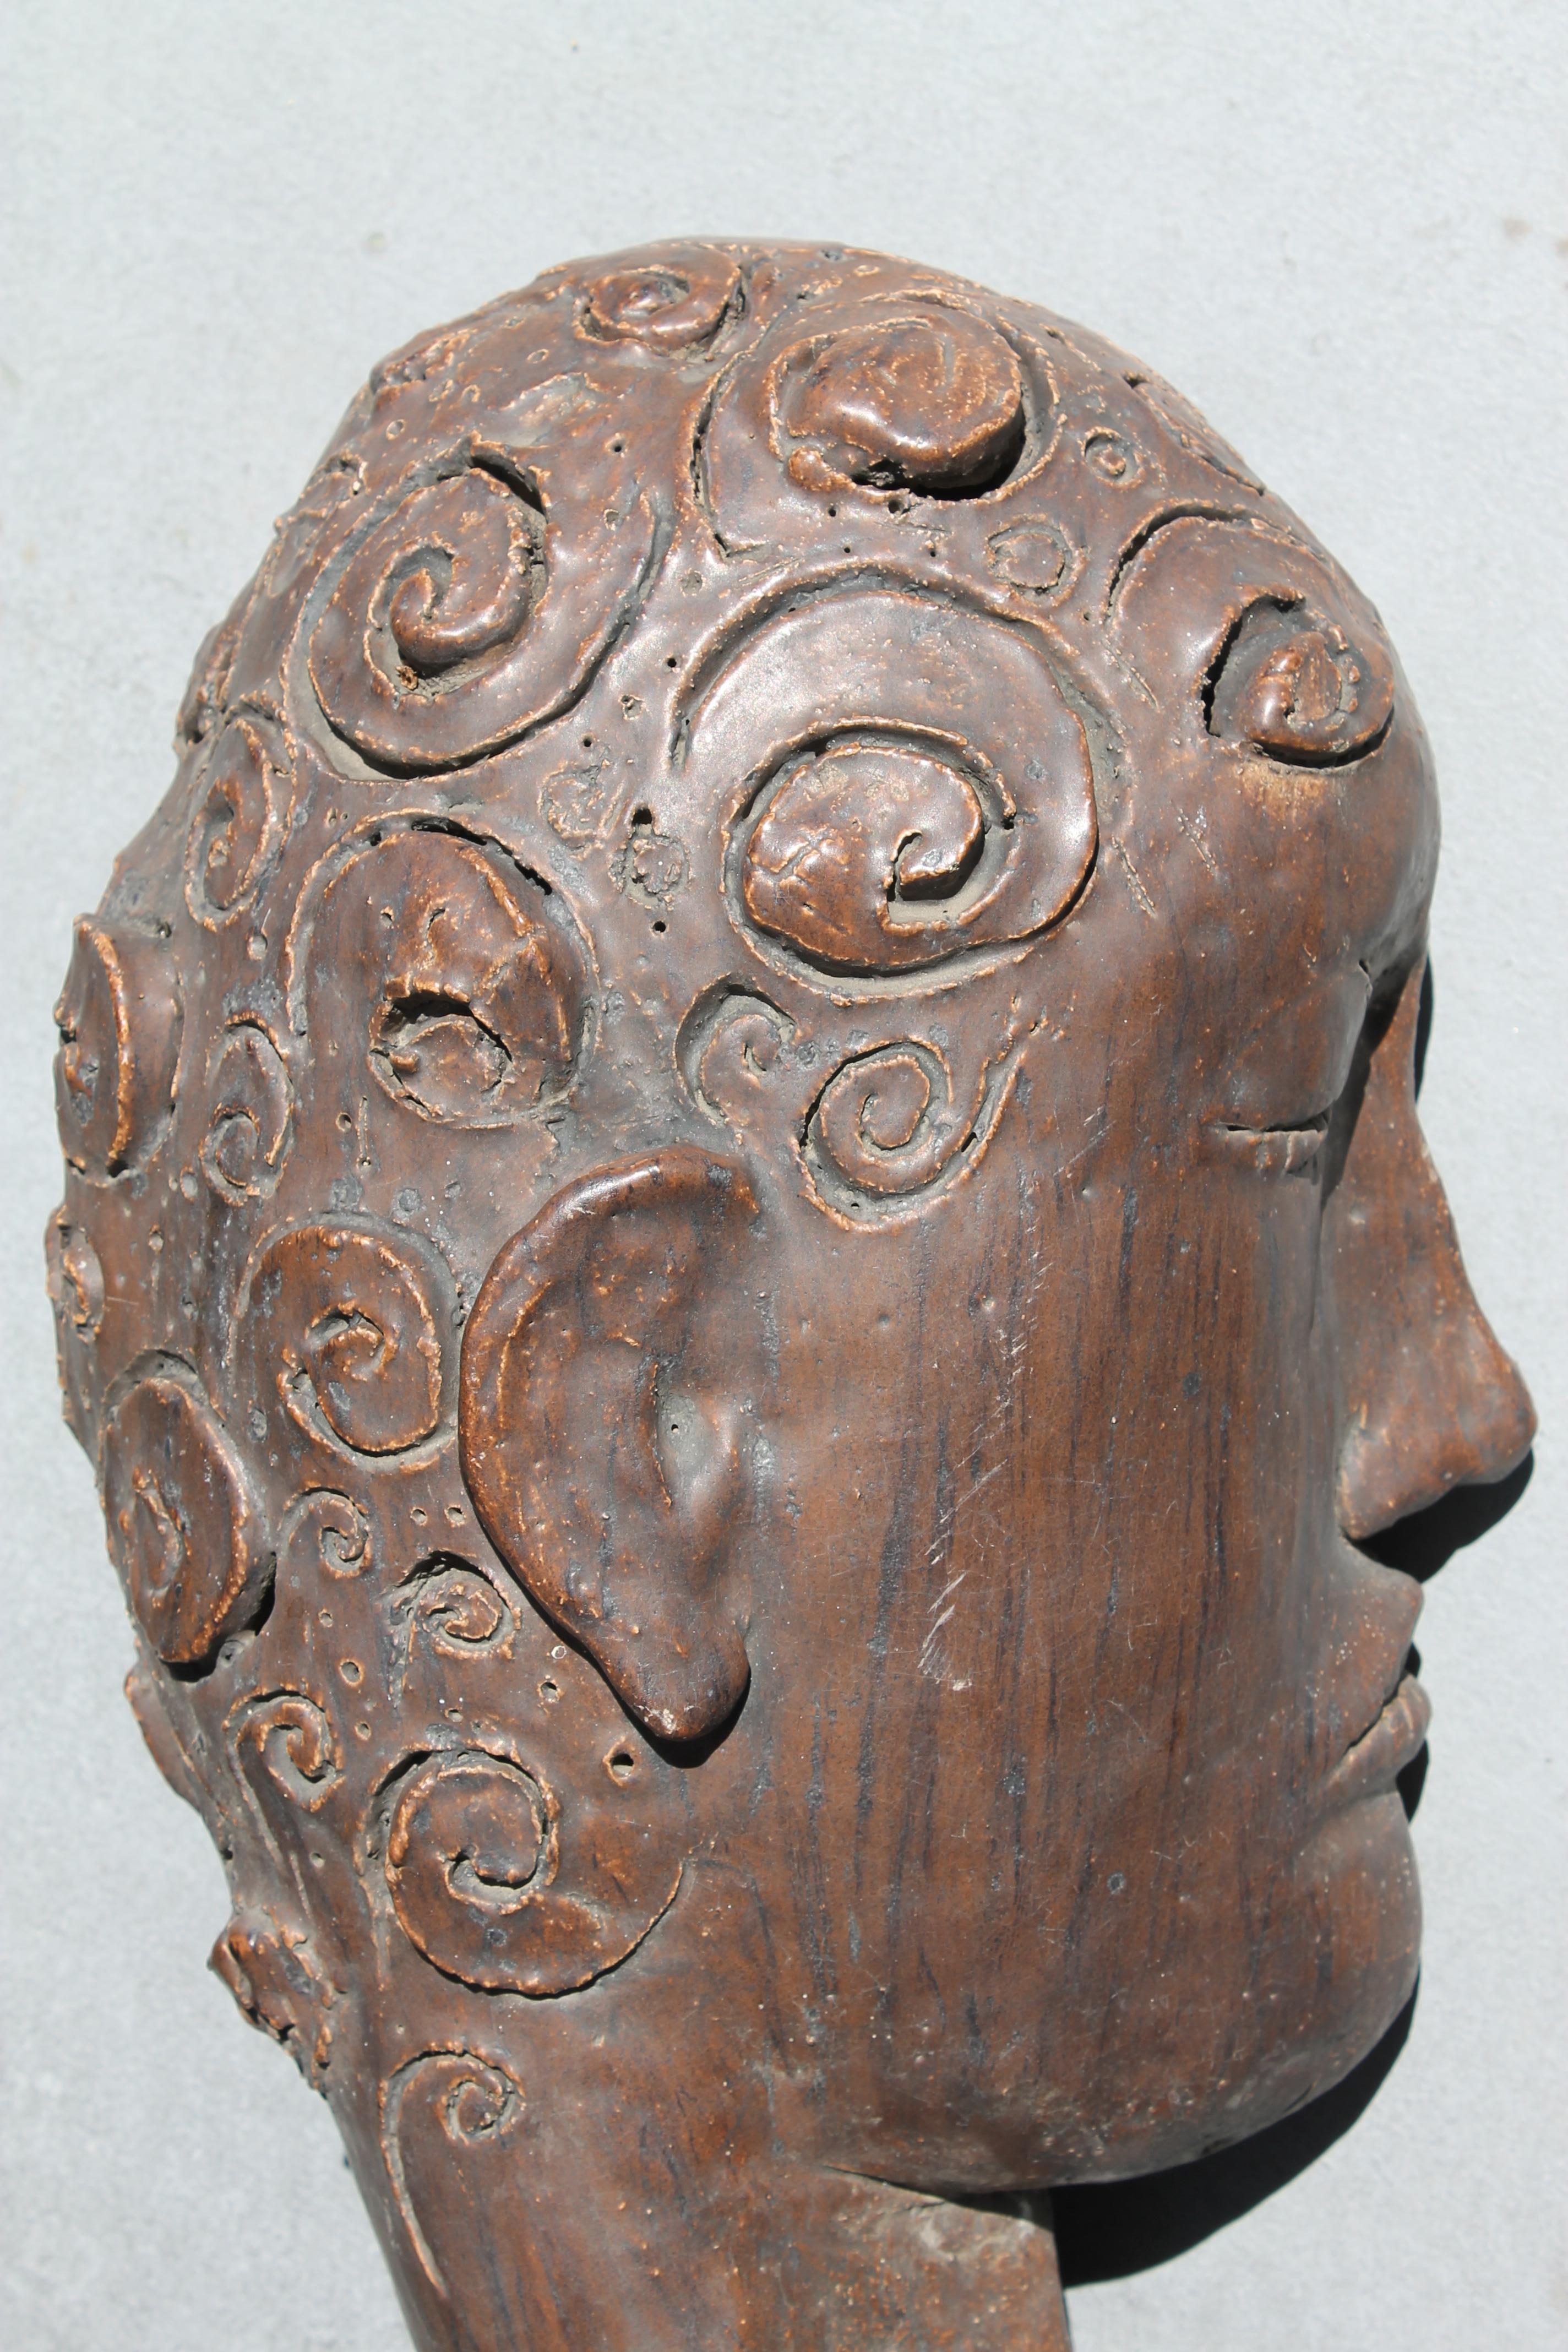 Beautiful hand carved stoneware face sculpture by James Kouretas (1947-2016).  Sculpture has 2 holes in the back most likely for hanging on the wall or could be displayed on a table.  Signed on the bottom portion of neck.  Sculpture measures 17.5